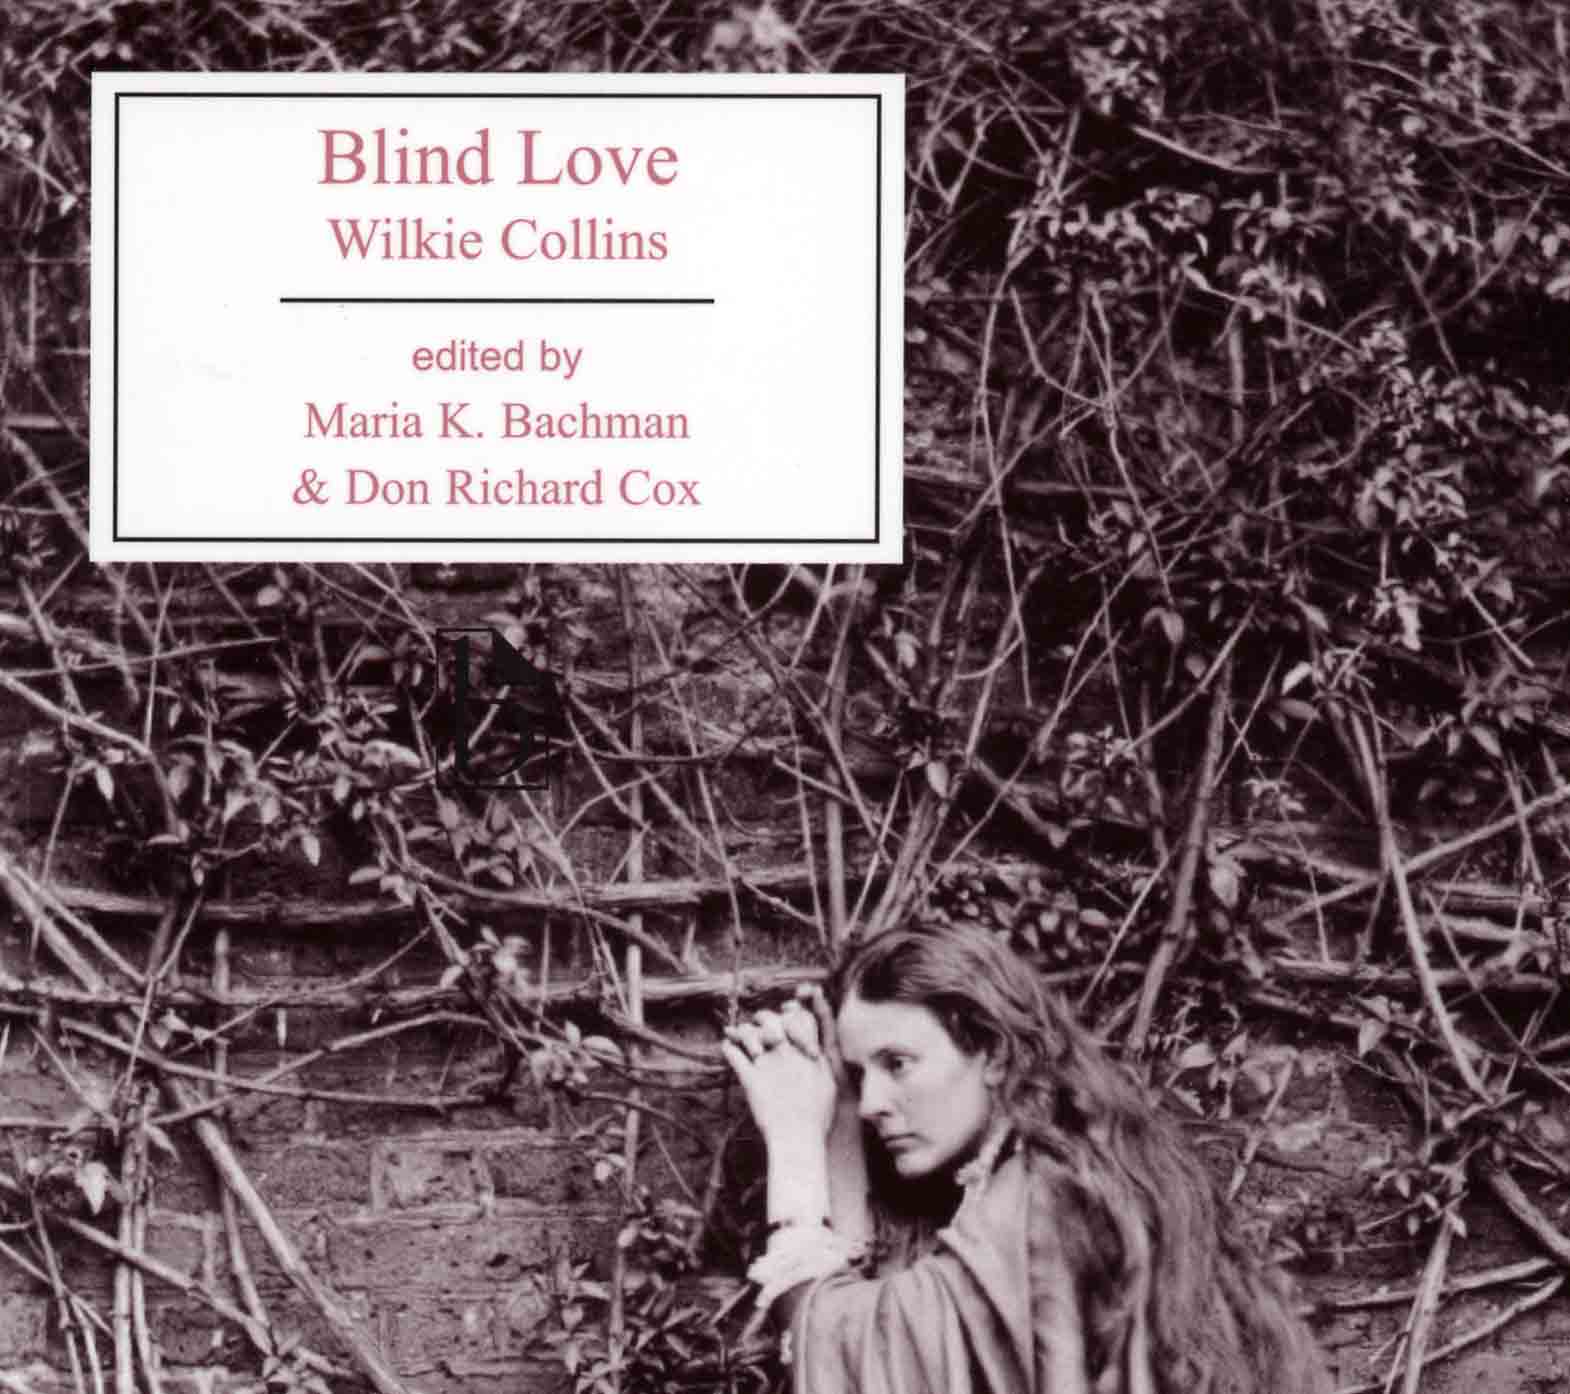 Blind Love, Wilkie Collins - Broadview Press - Bachman and Cox